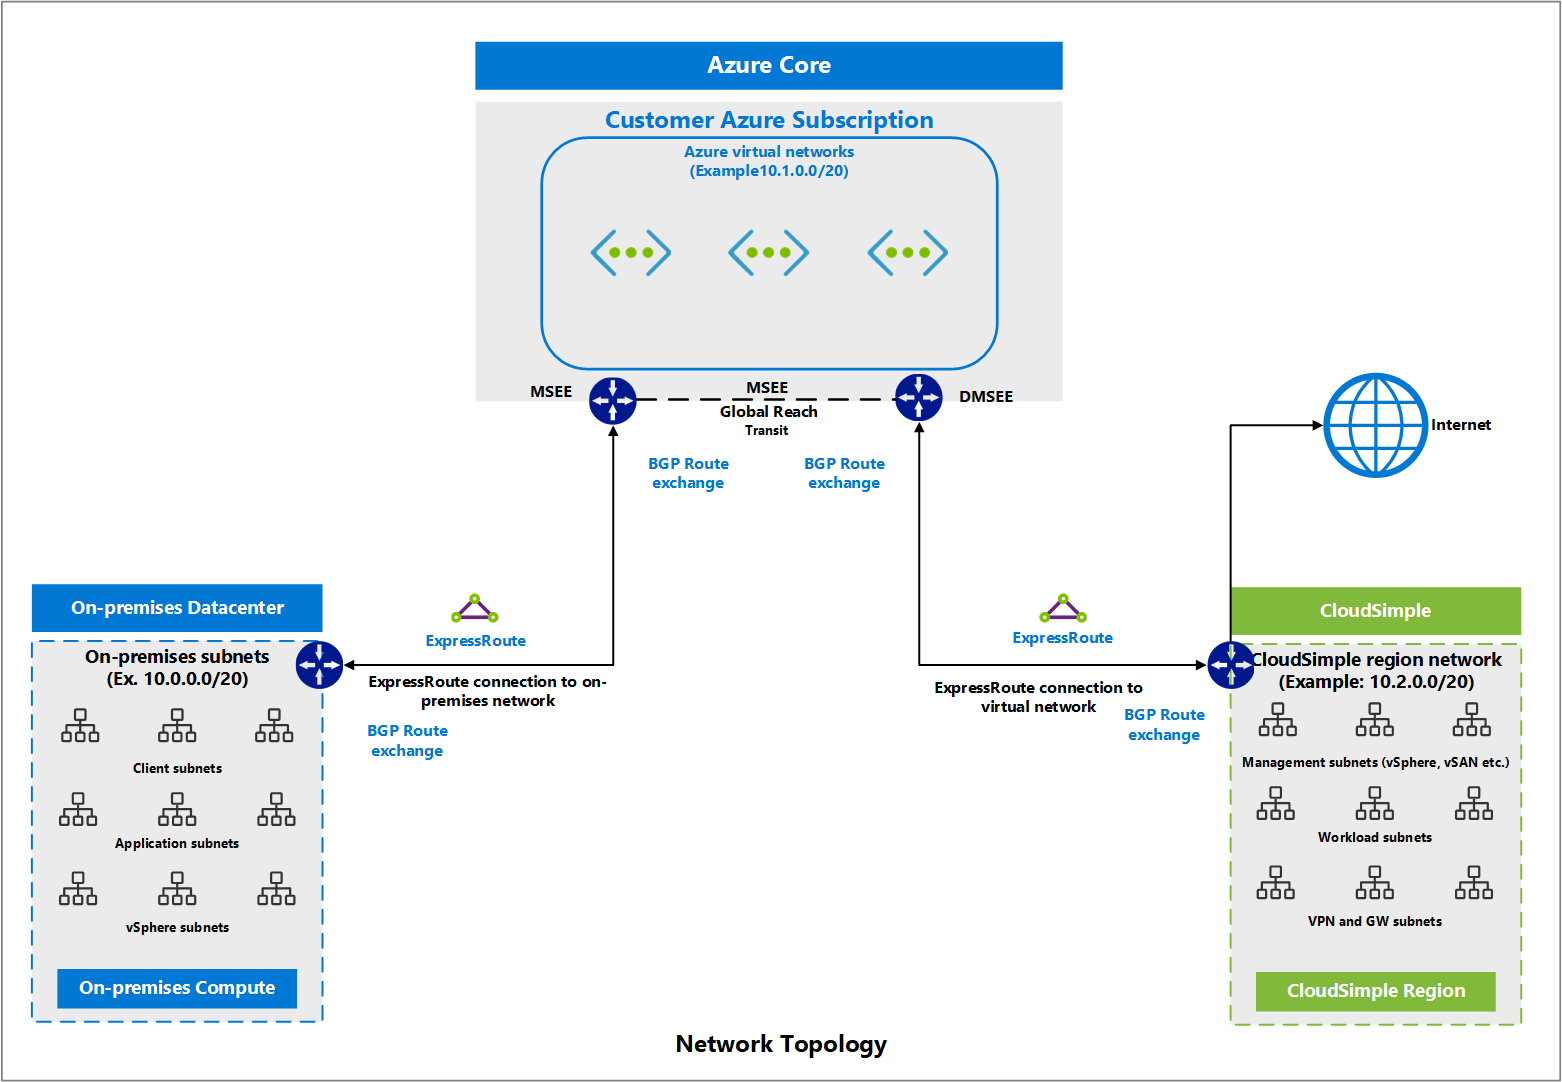 CloudSimple Network Topology